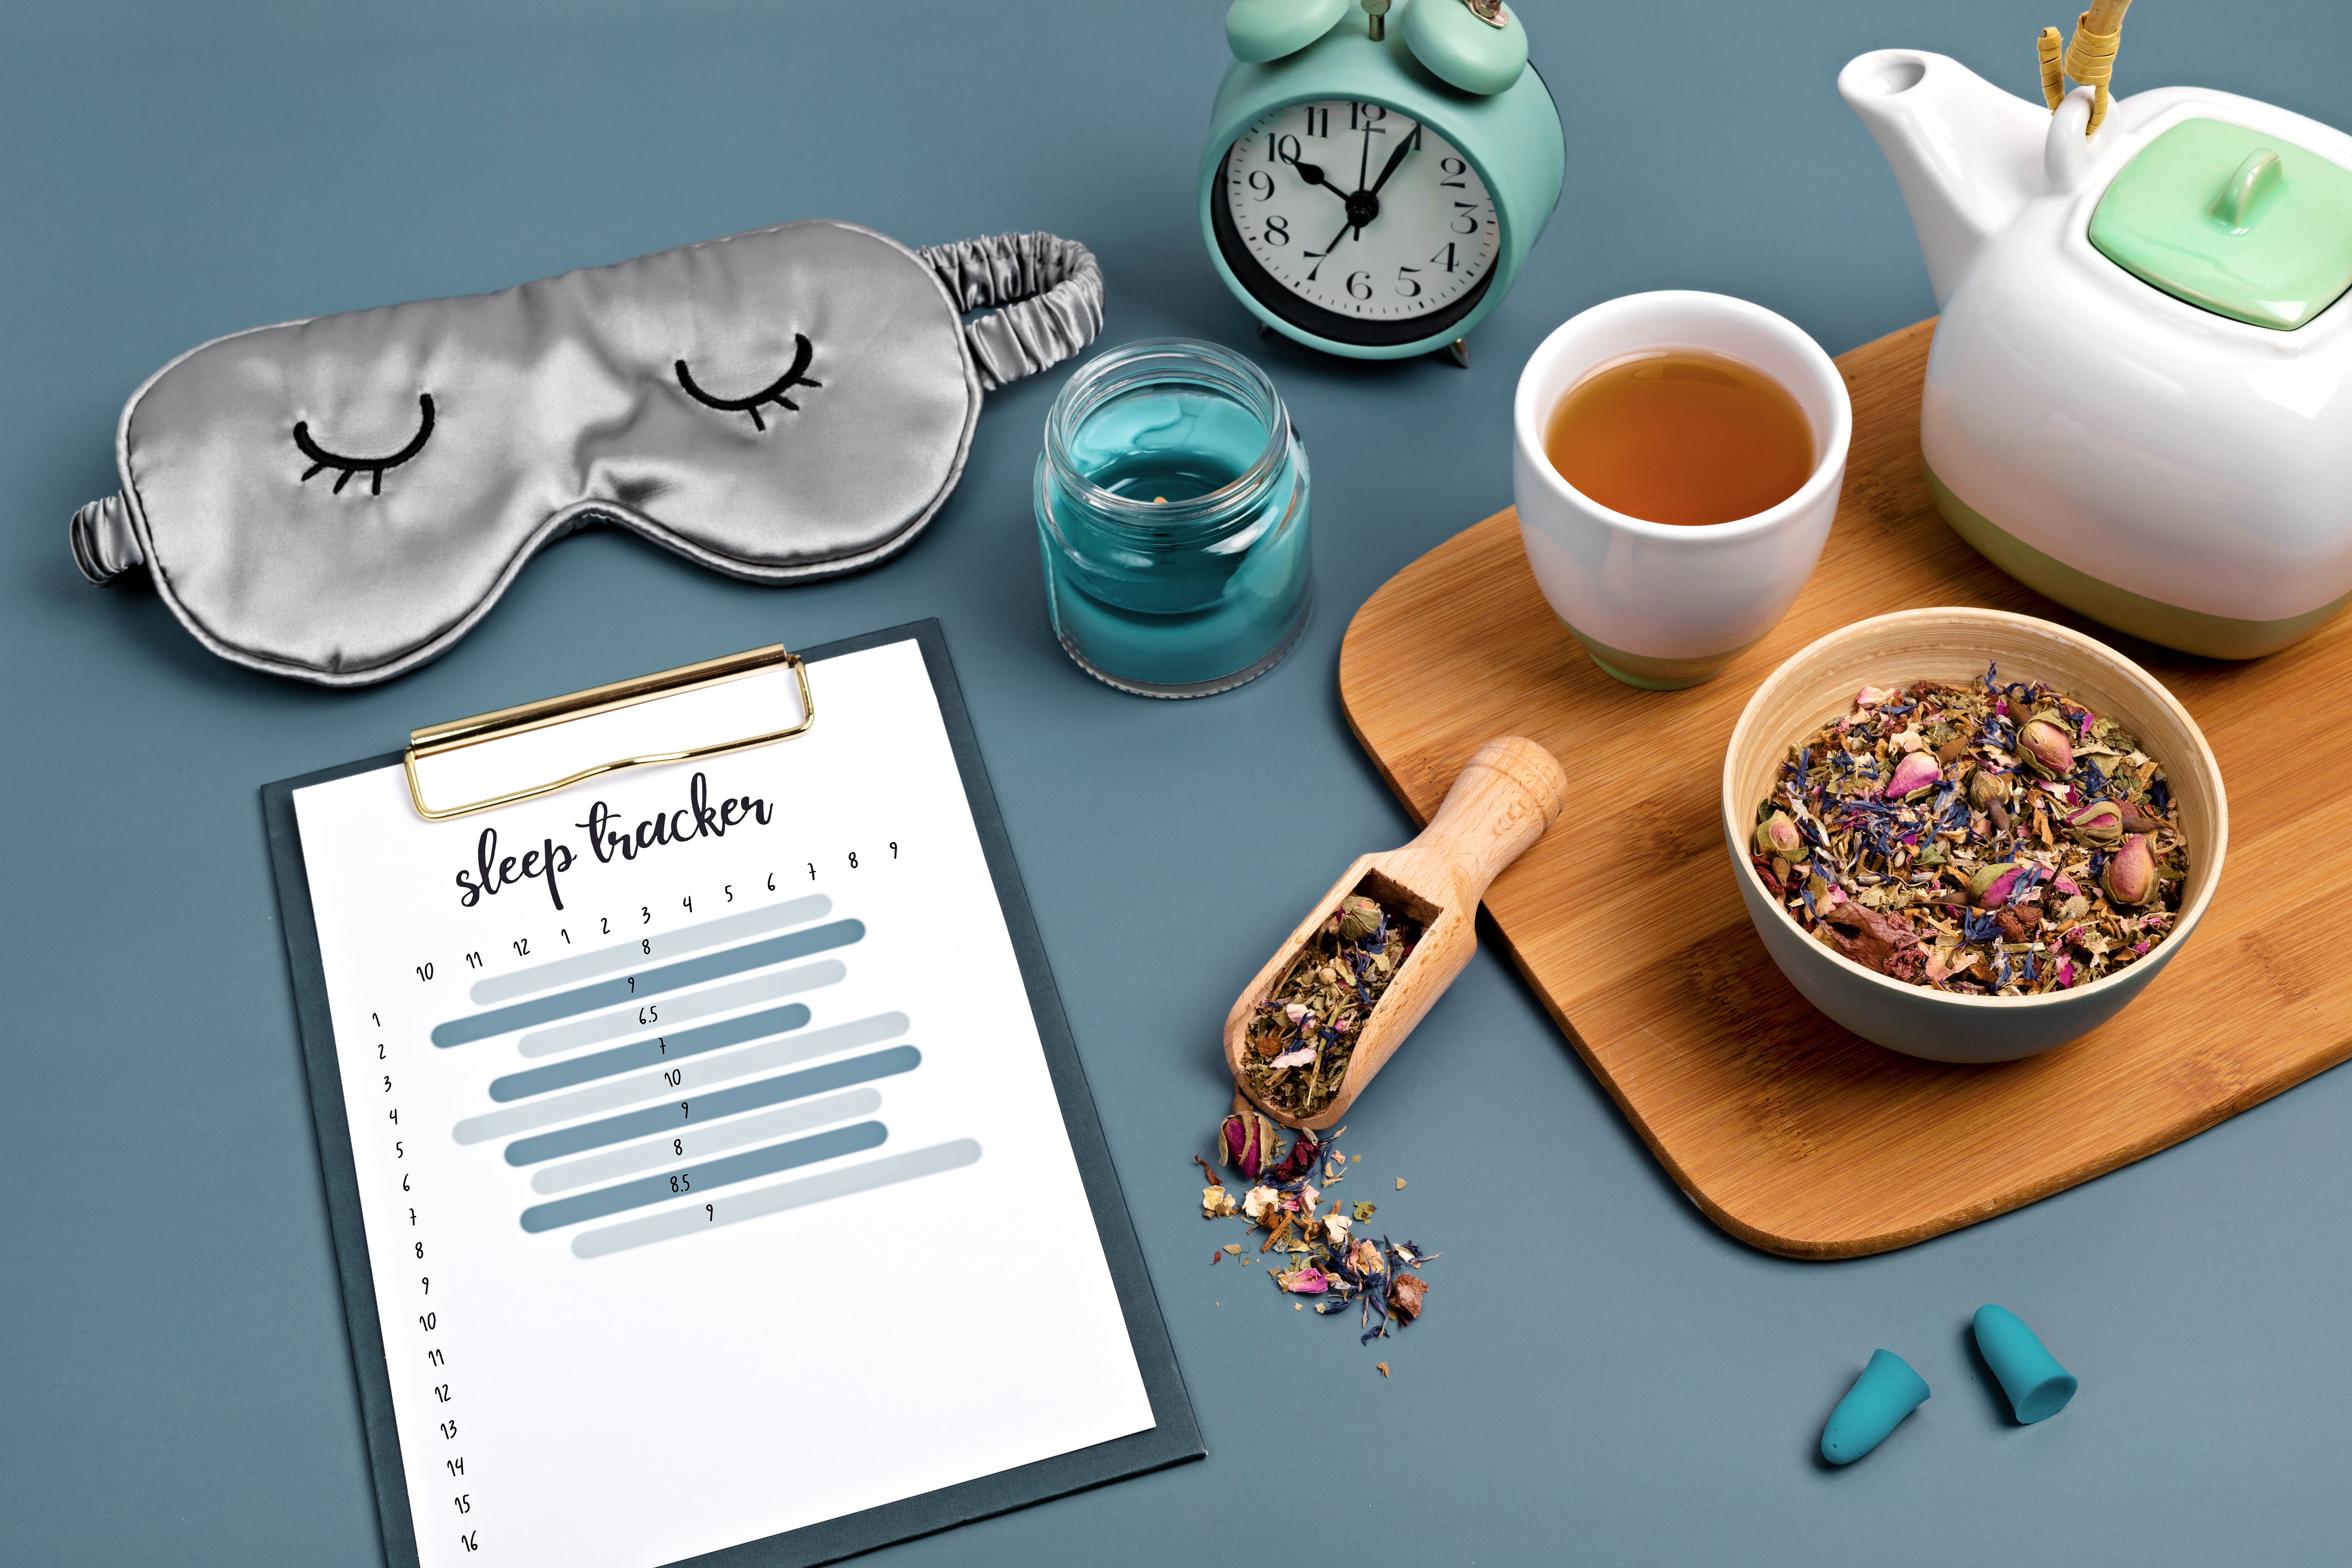 A collection of elements that can be worked into good sleep hygiene including herbal tea, and alarm clock, a sleep mask, and a sleep journal.